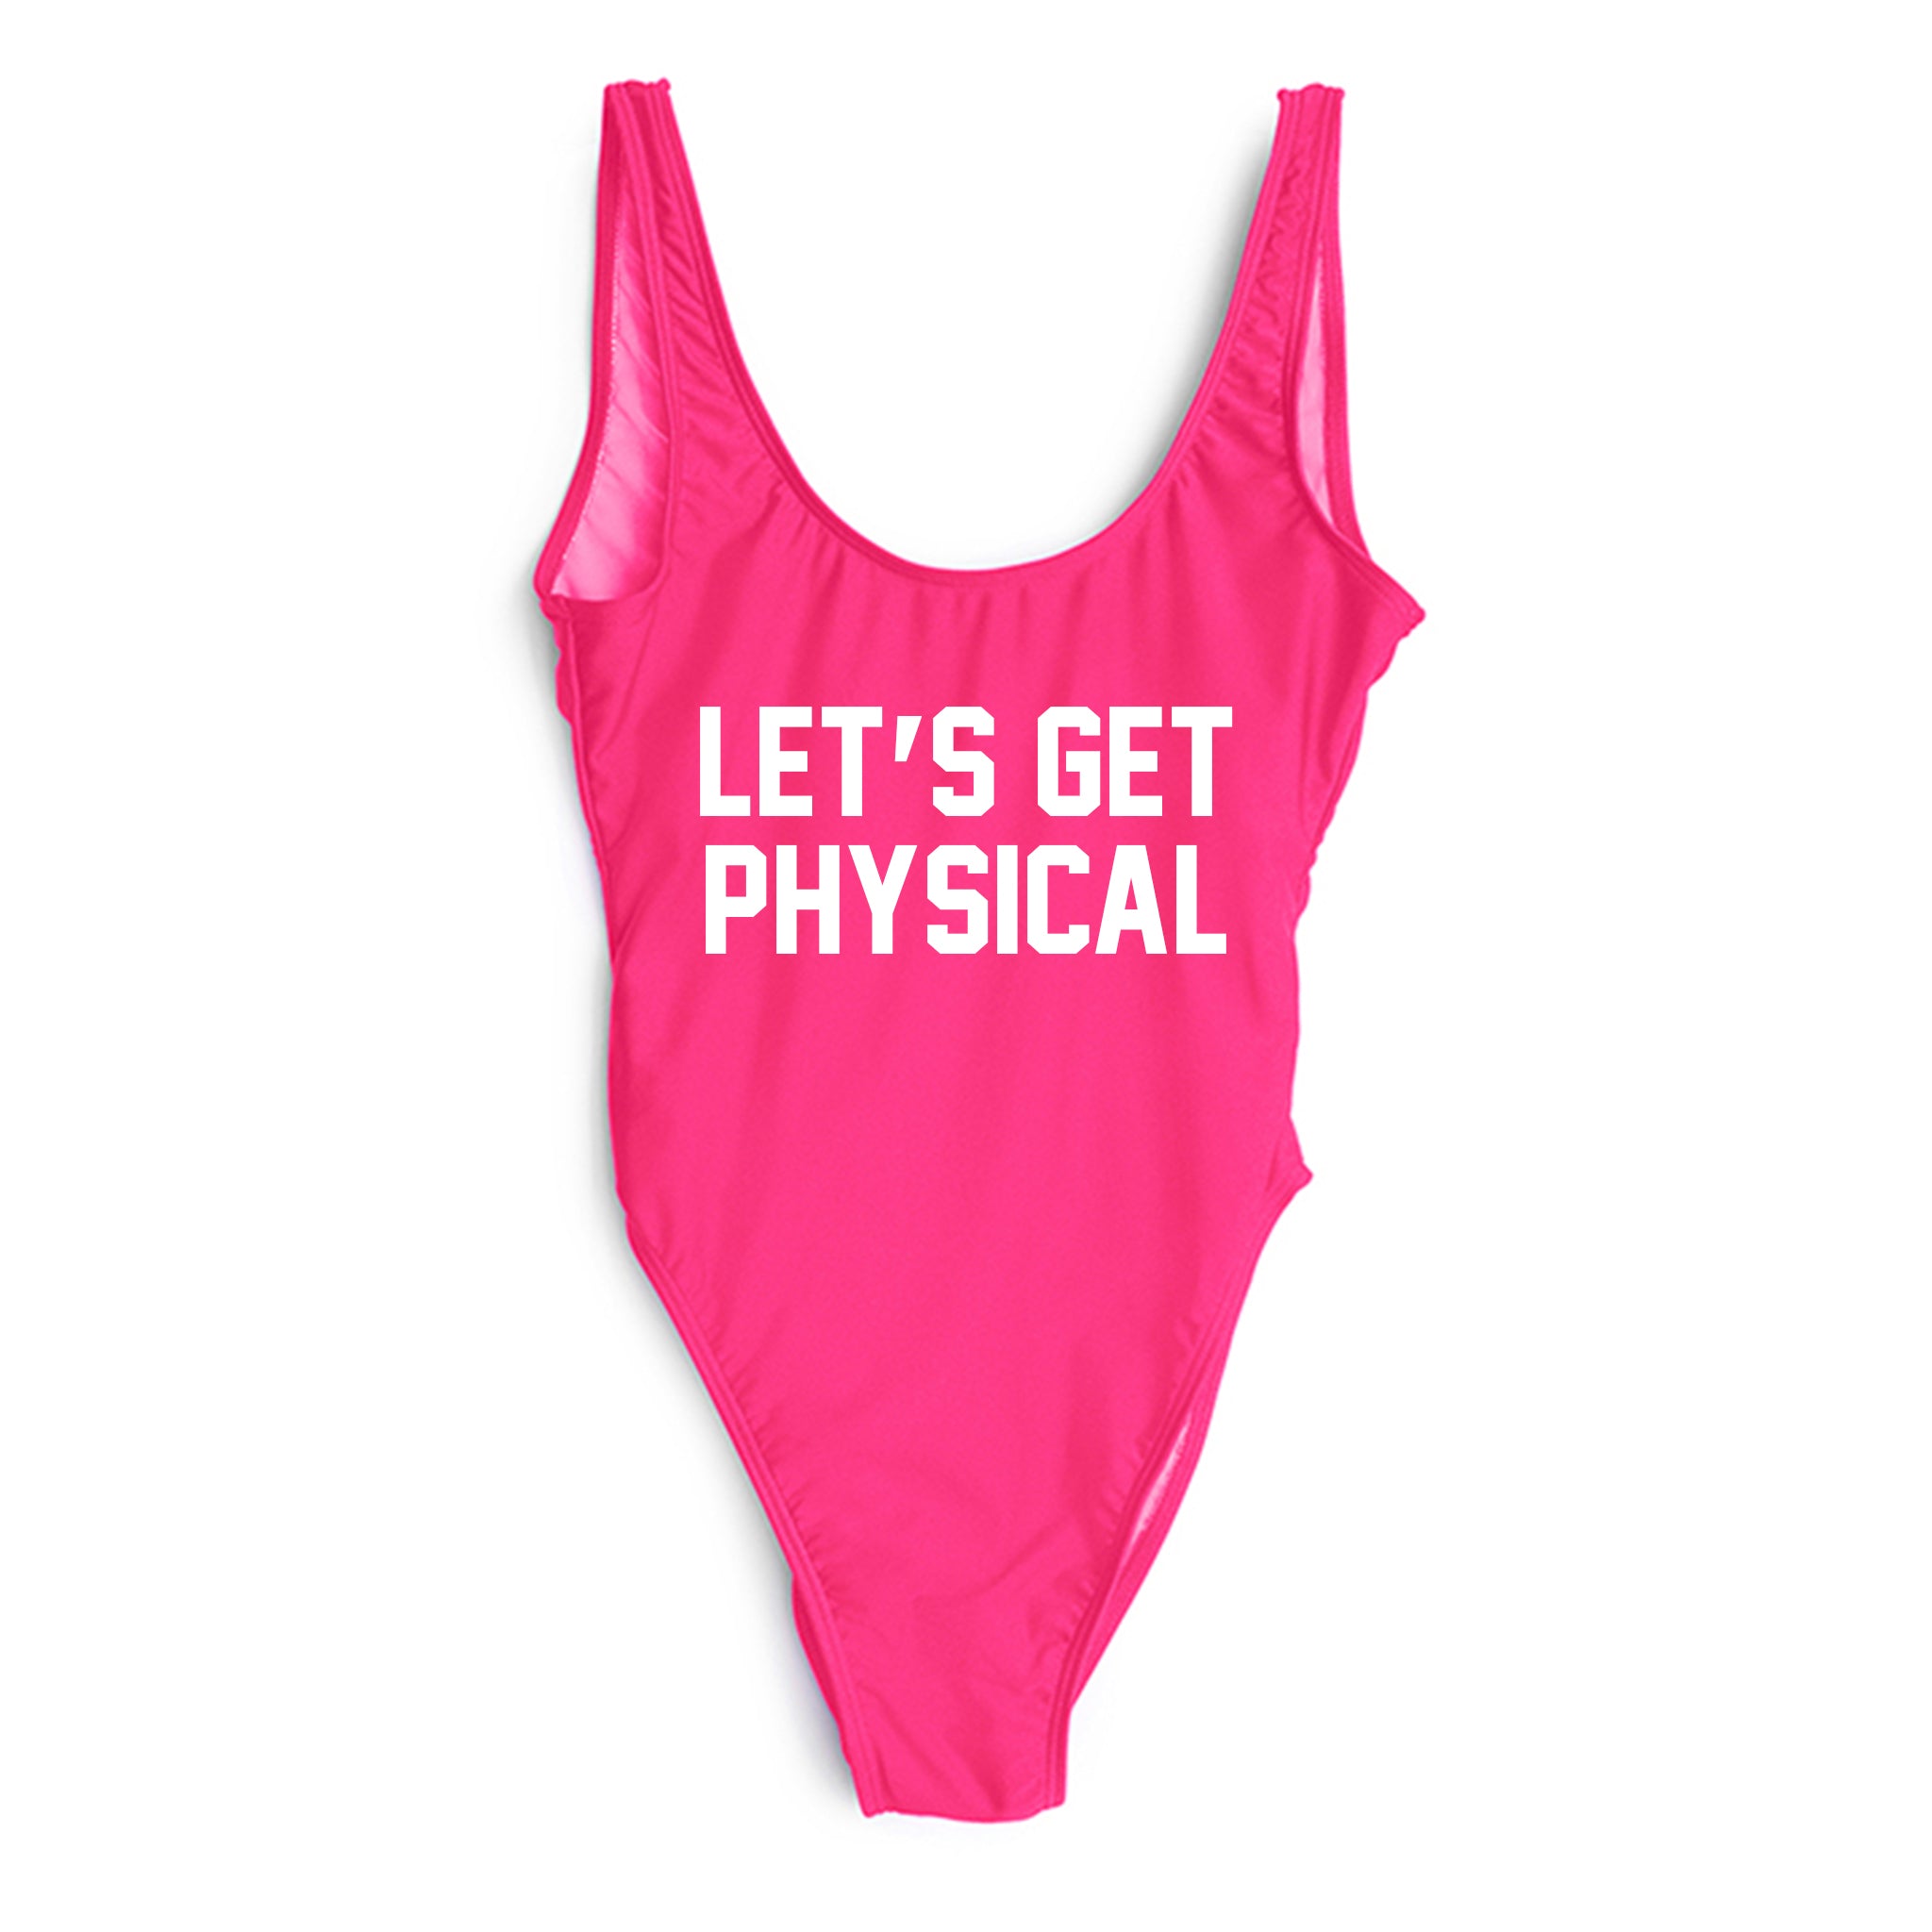 LET'S GET PHYSICAL [SWIMSUIT]